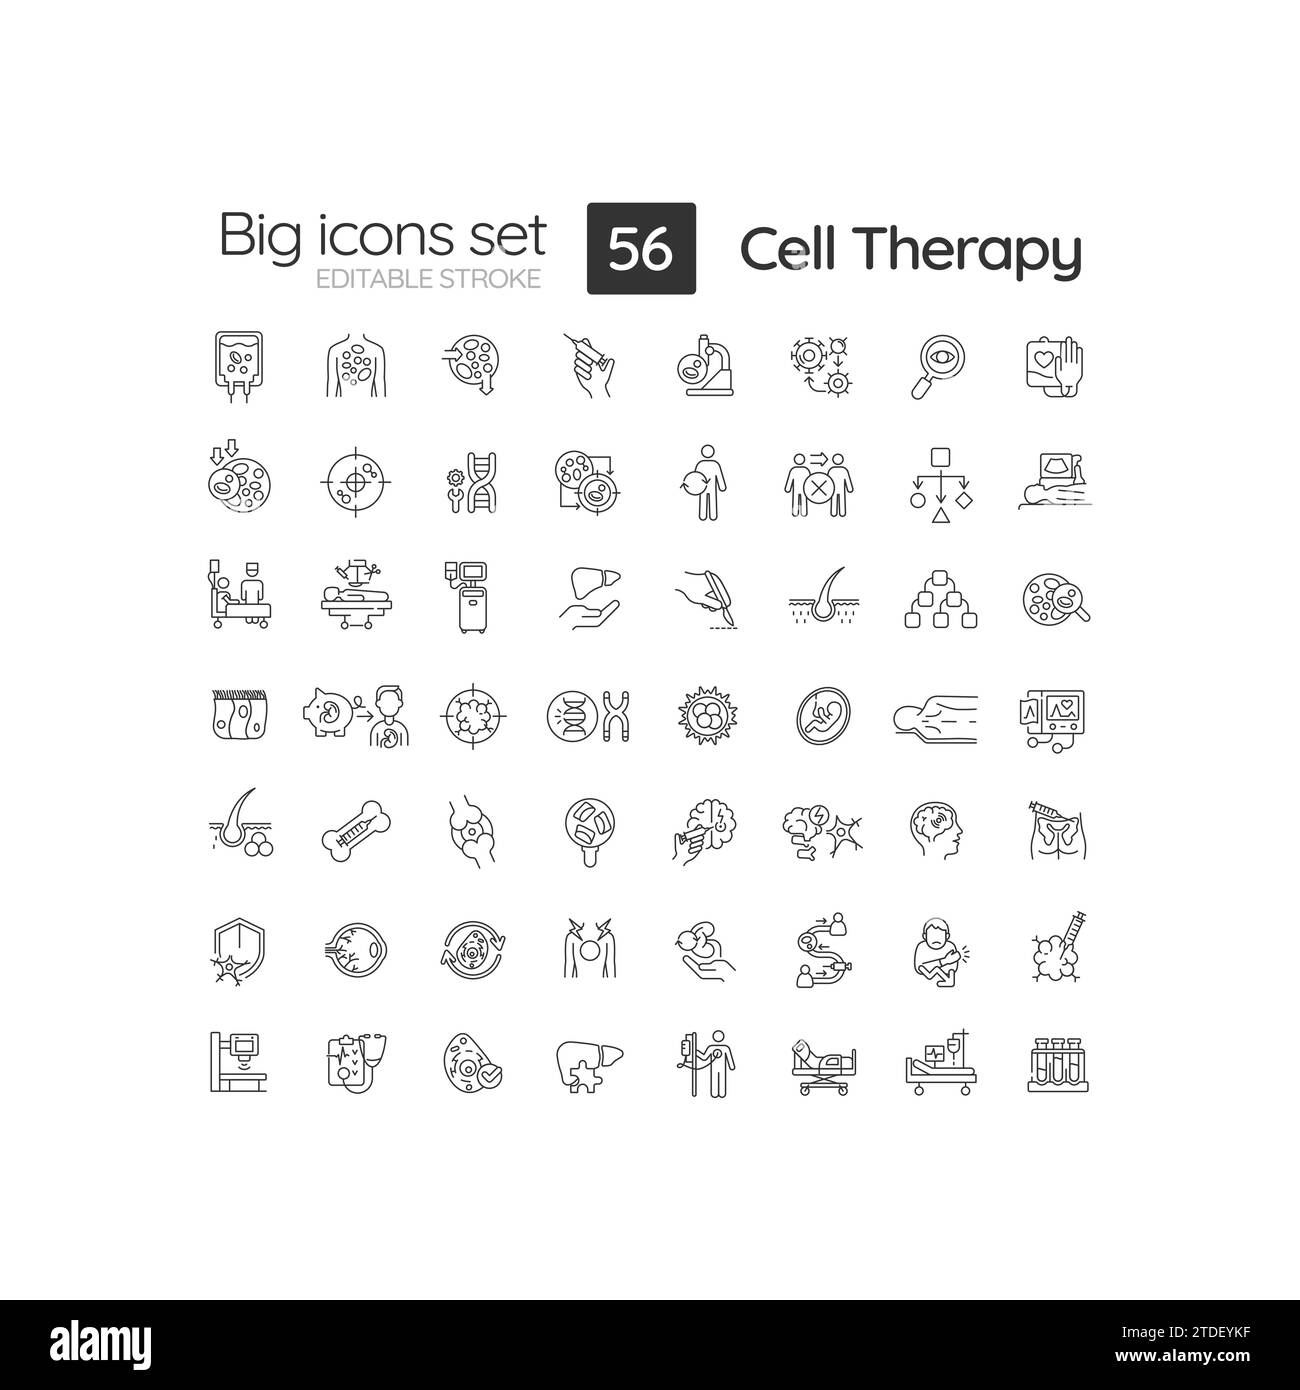 2D editable black big line icons set for cell therapy Stock Vector